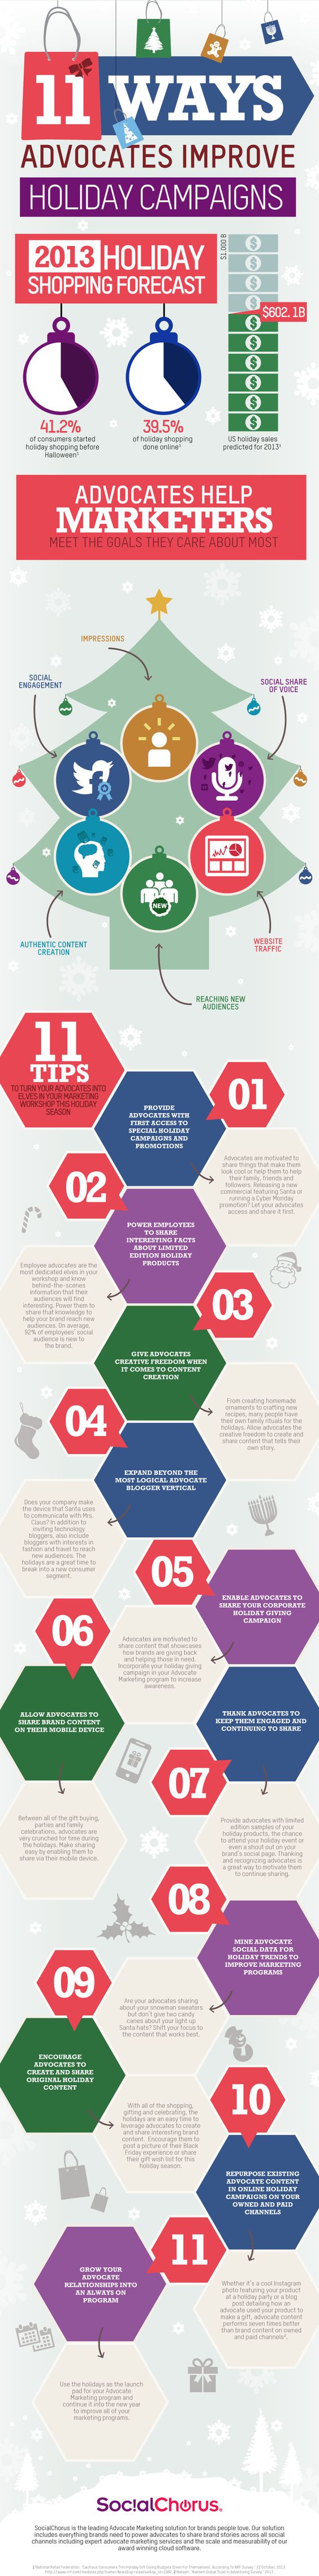 11 Tips for Turning Advocates Into Elves This Holiday Season [INFOGRAPHIC]